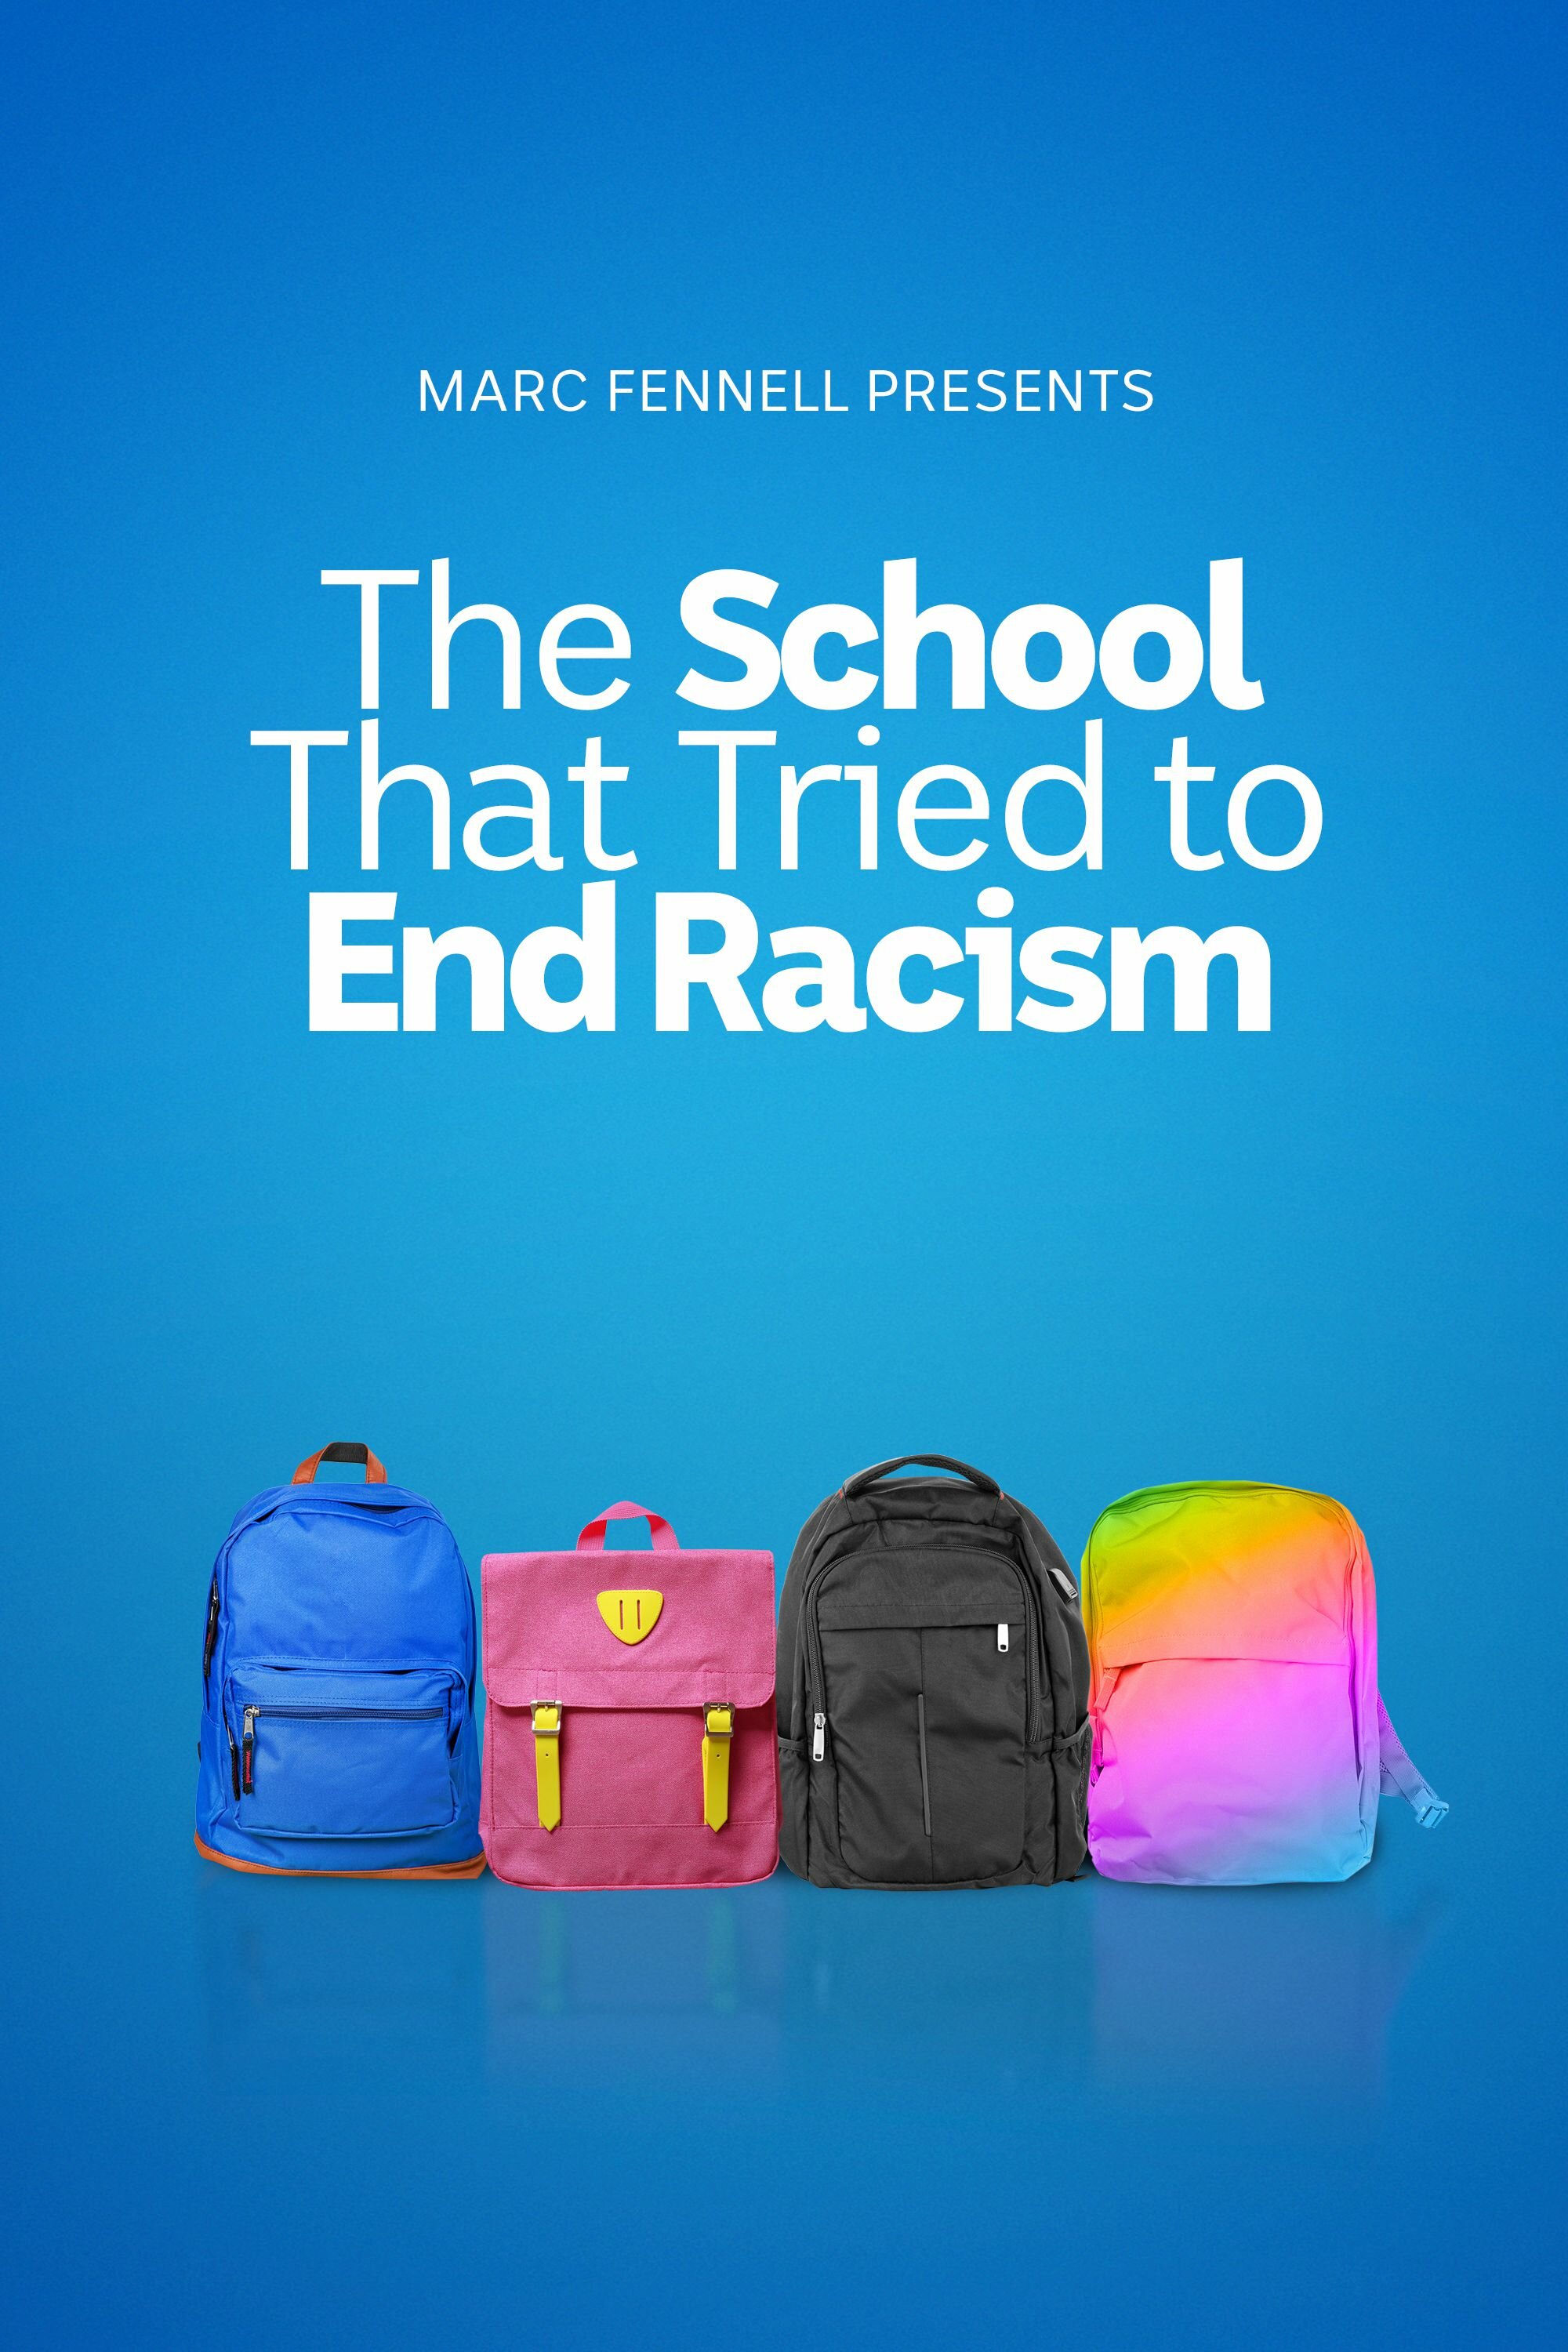 The School That Tried to End Racism ne zaman